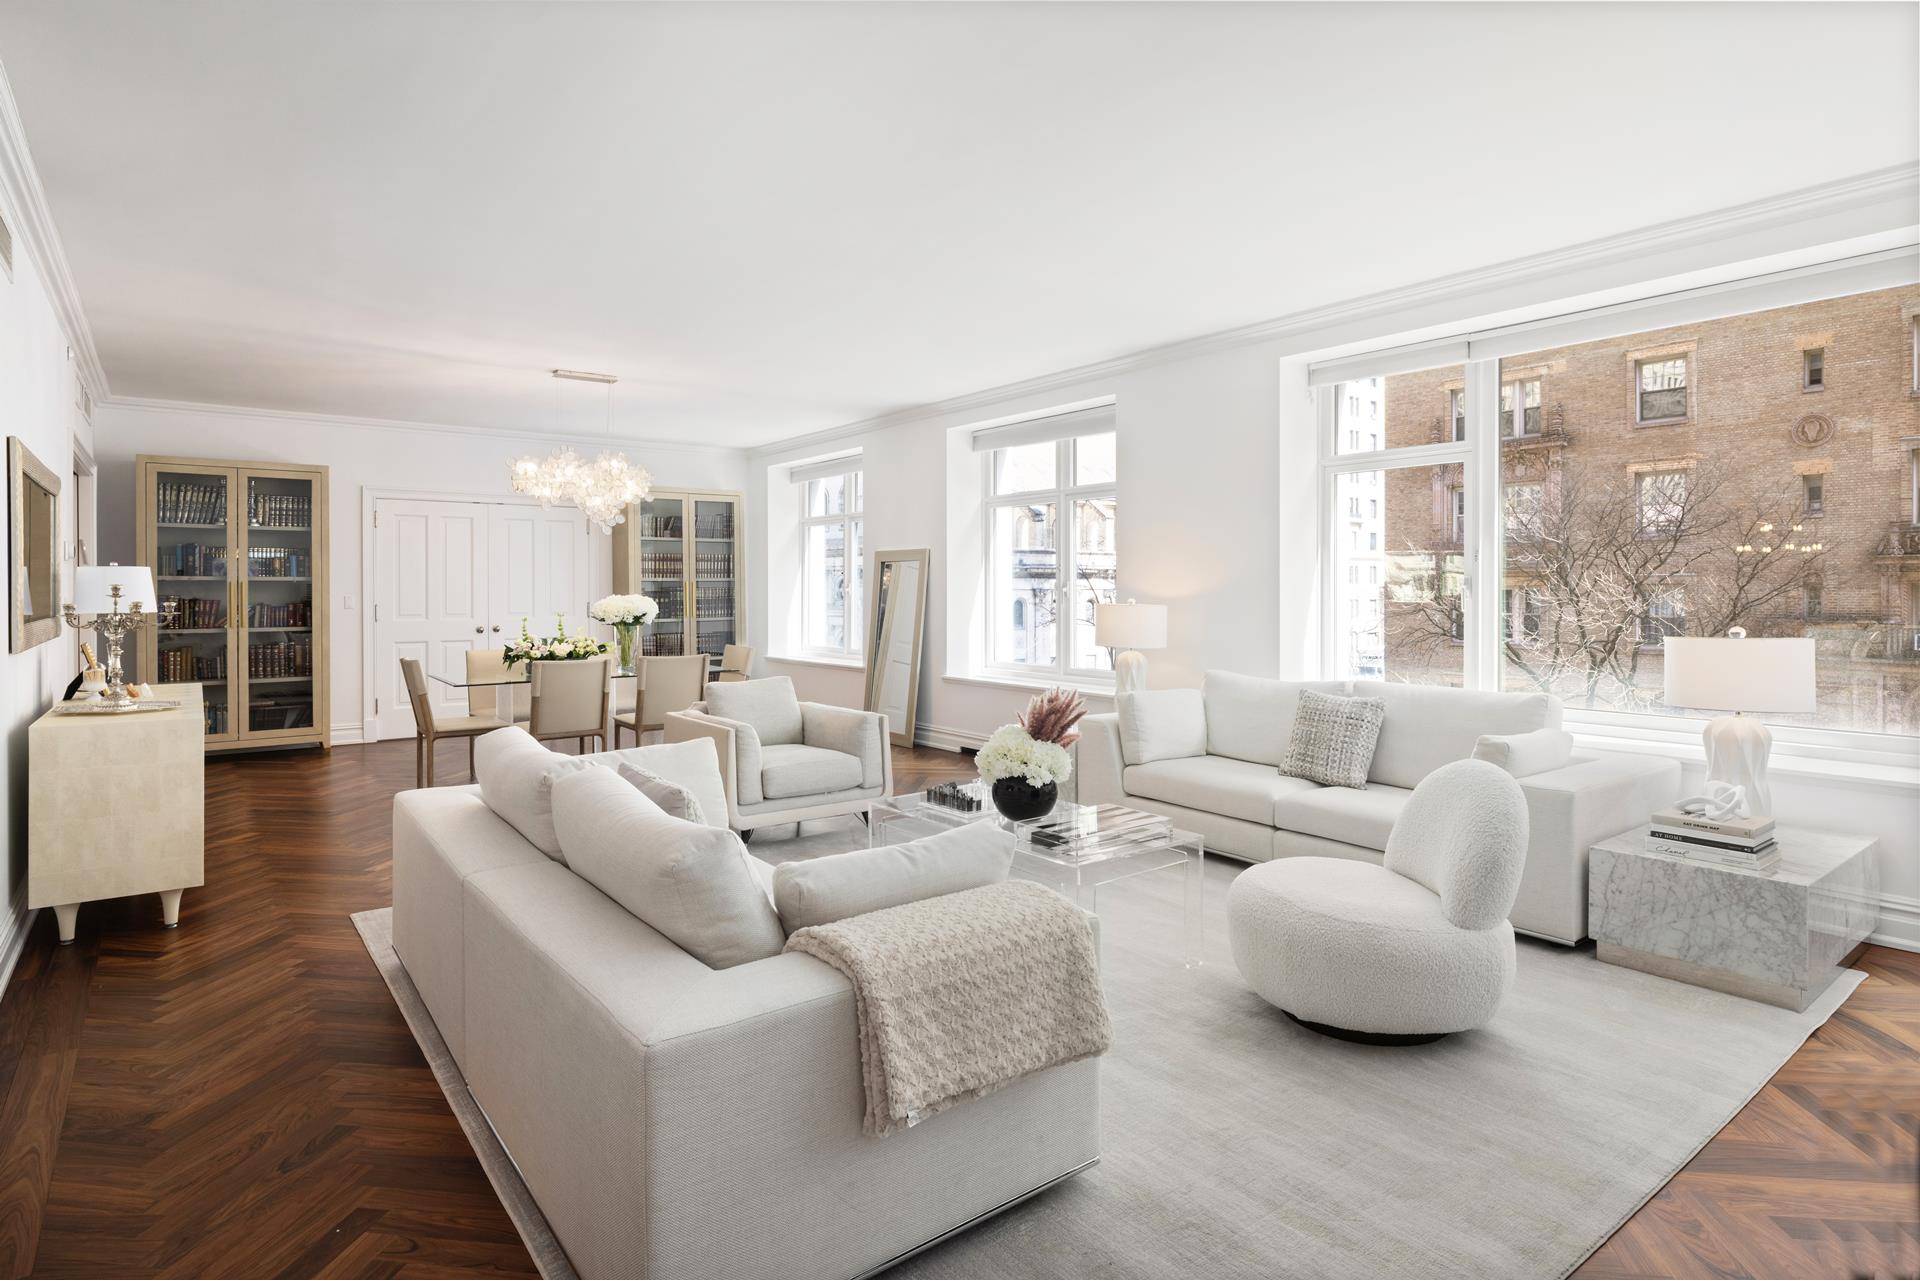 THE BEST OF BOTH WORLDS This stunning half floor residence has the charm and sensibility of a prewar cooperative, with all of the modern conveniences of new construction.